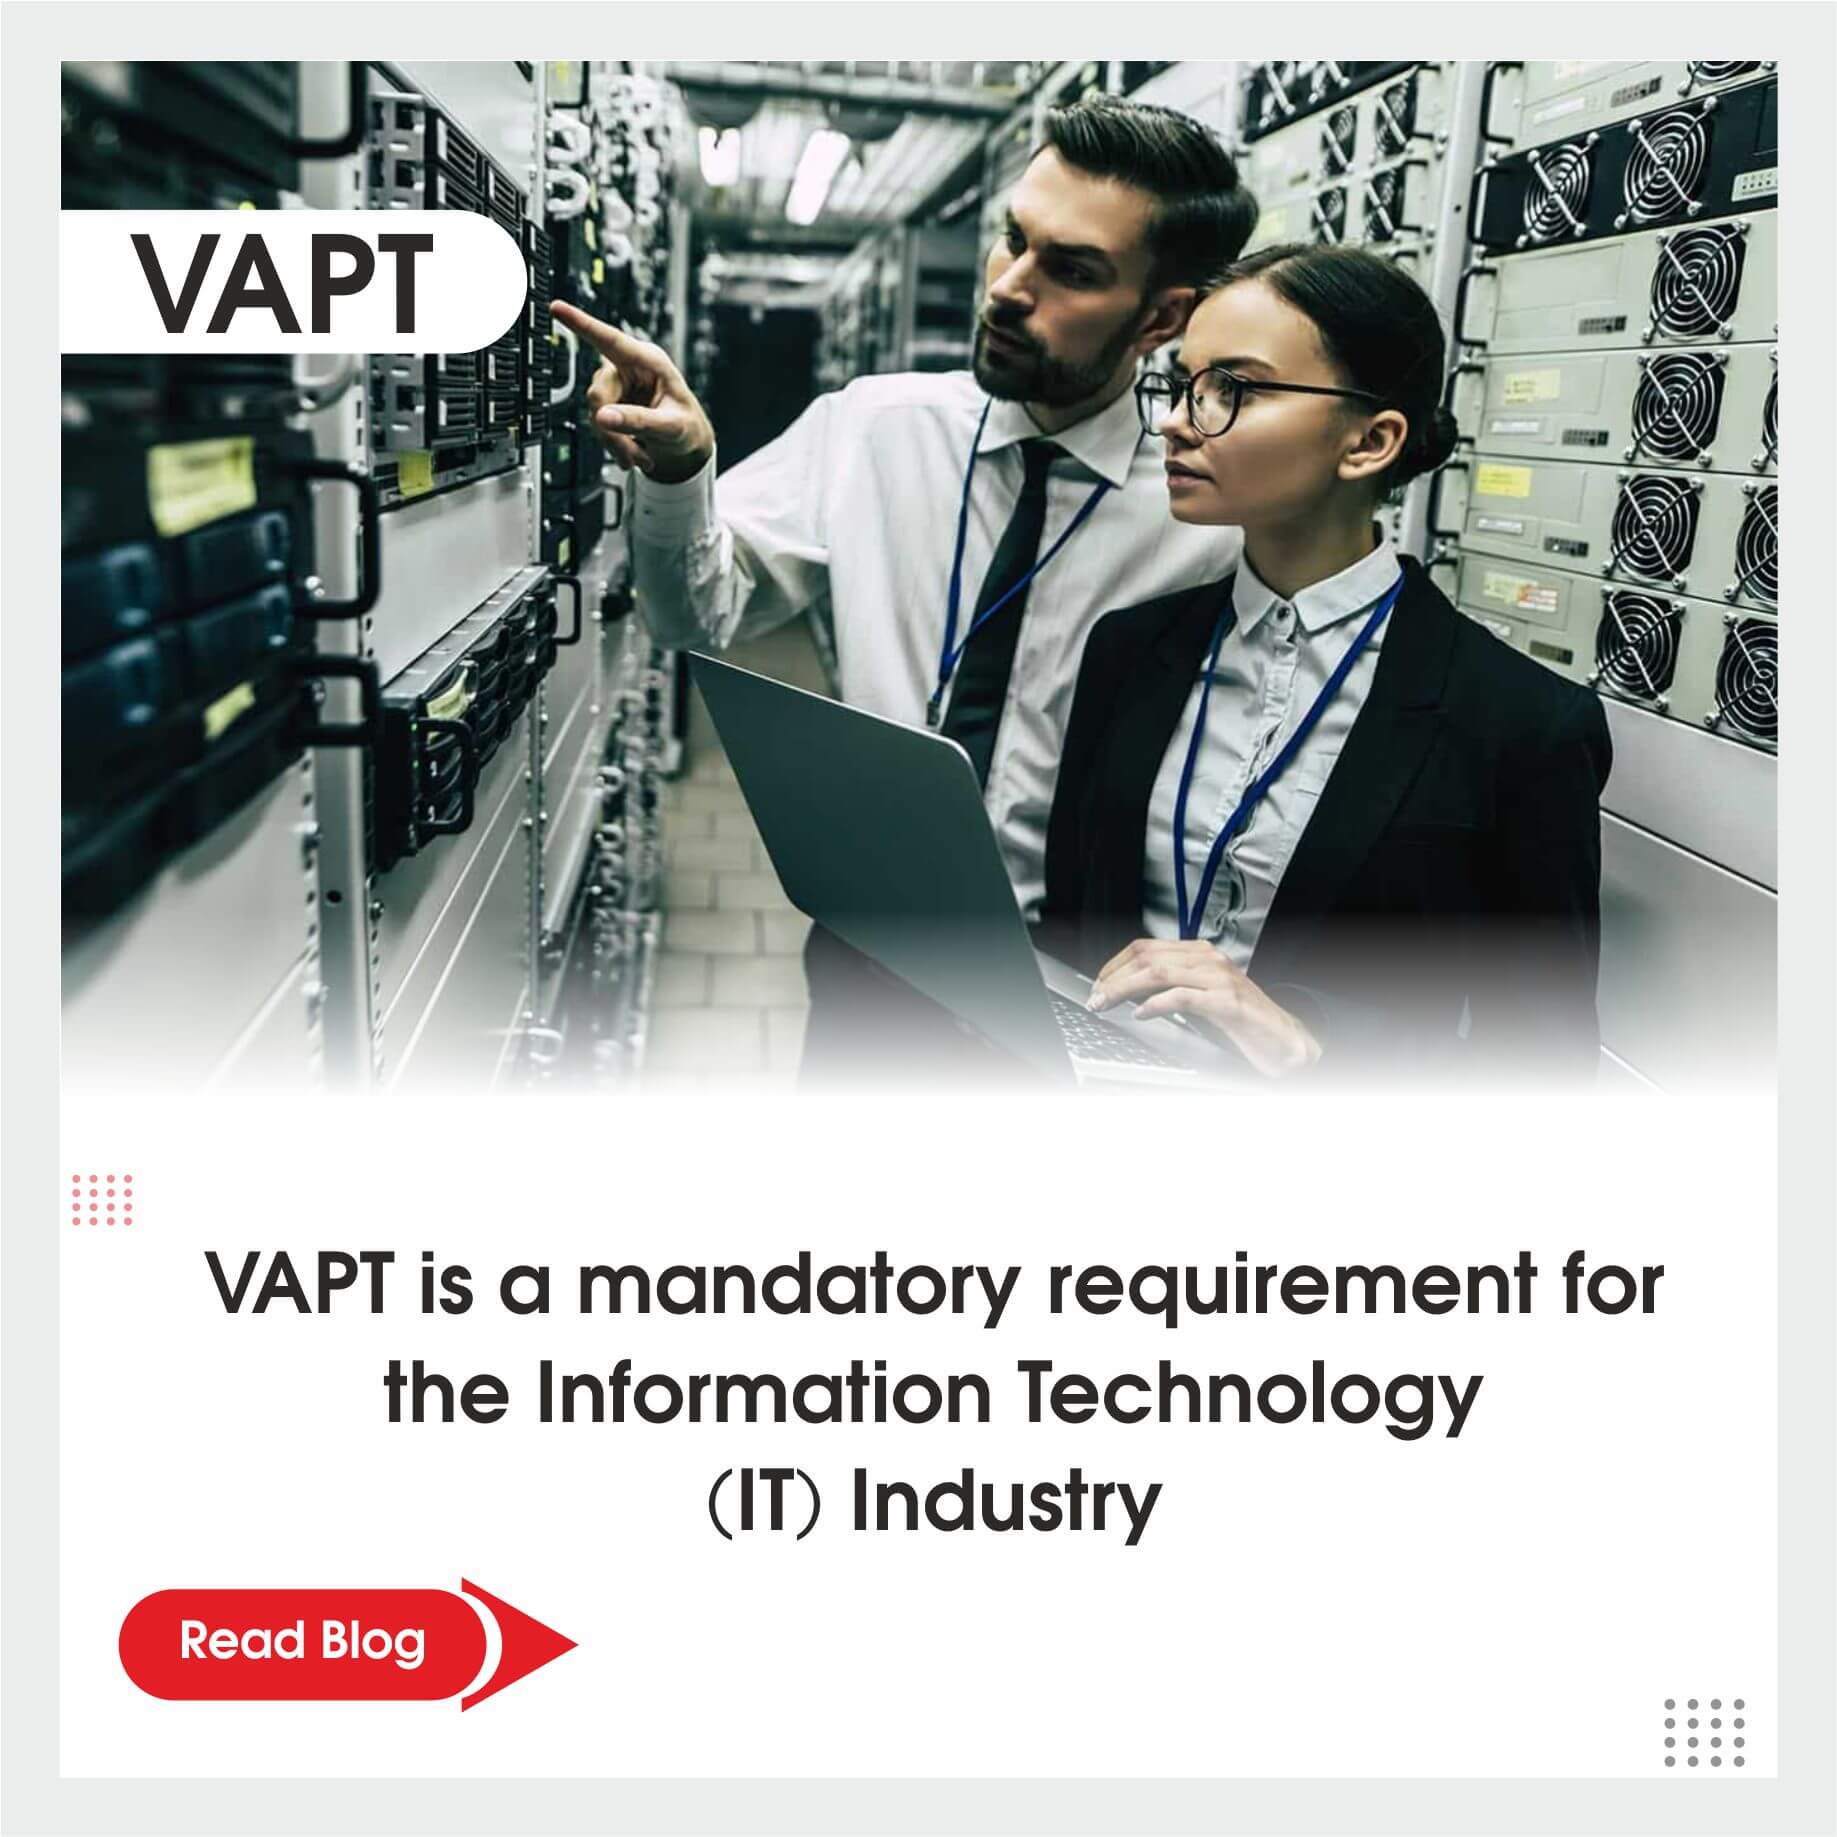 VAPT is a mandatory requirement for the Information Technology (IT) Industry